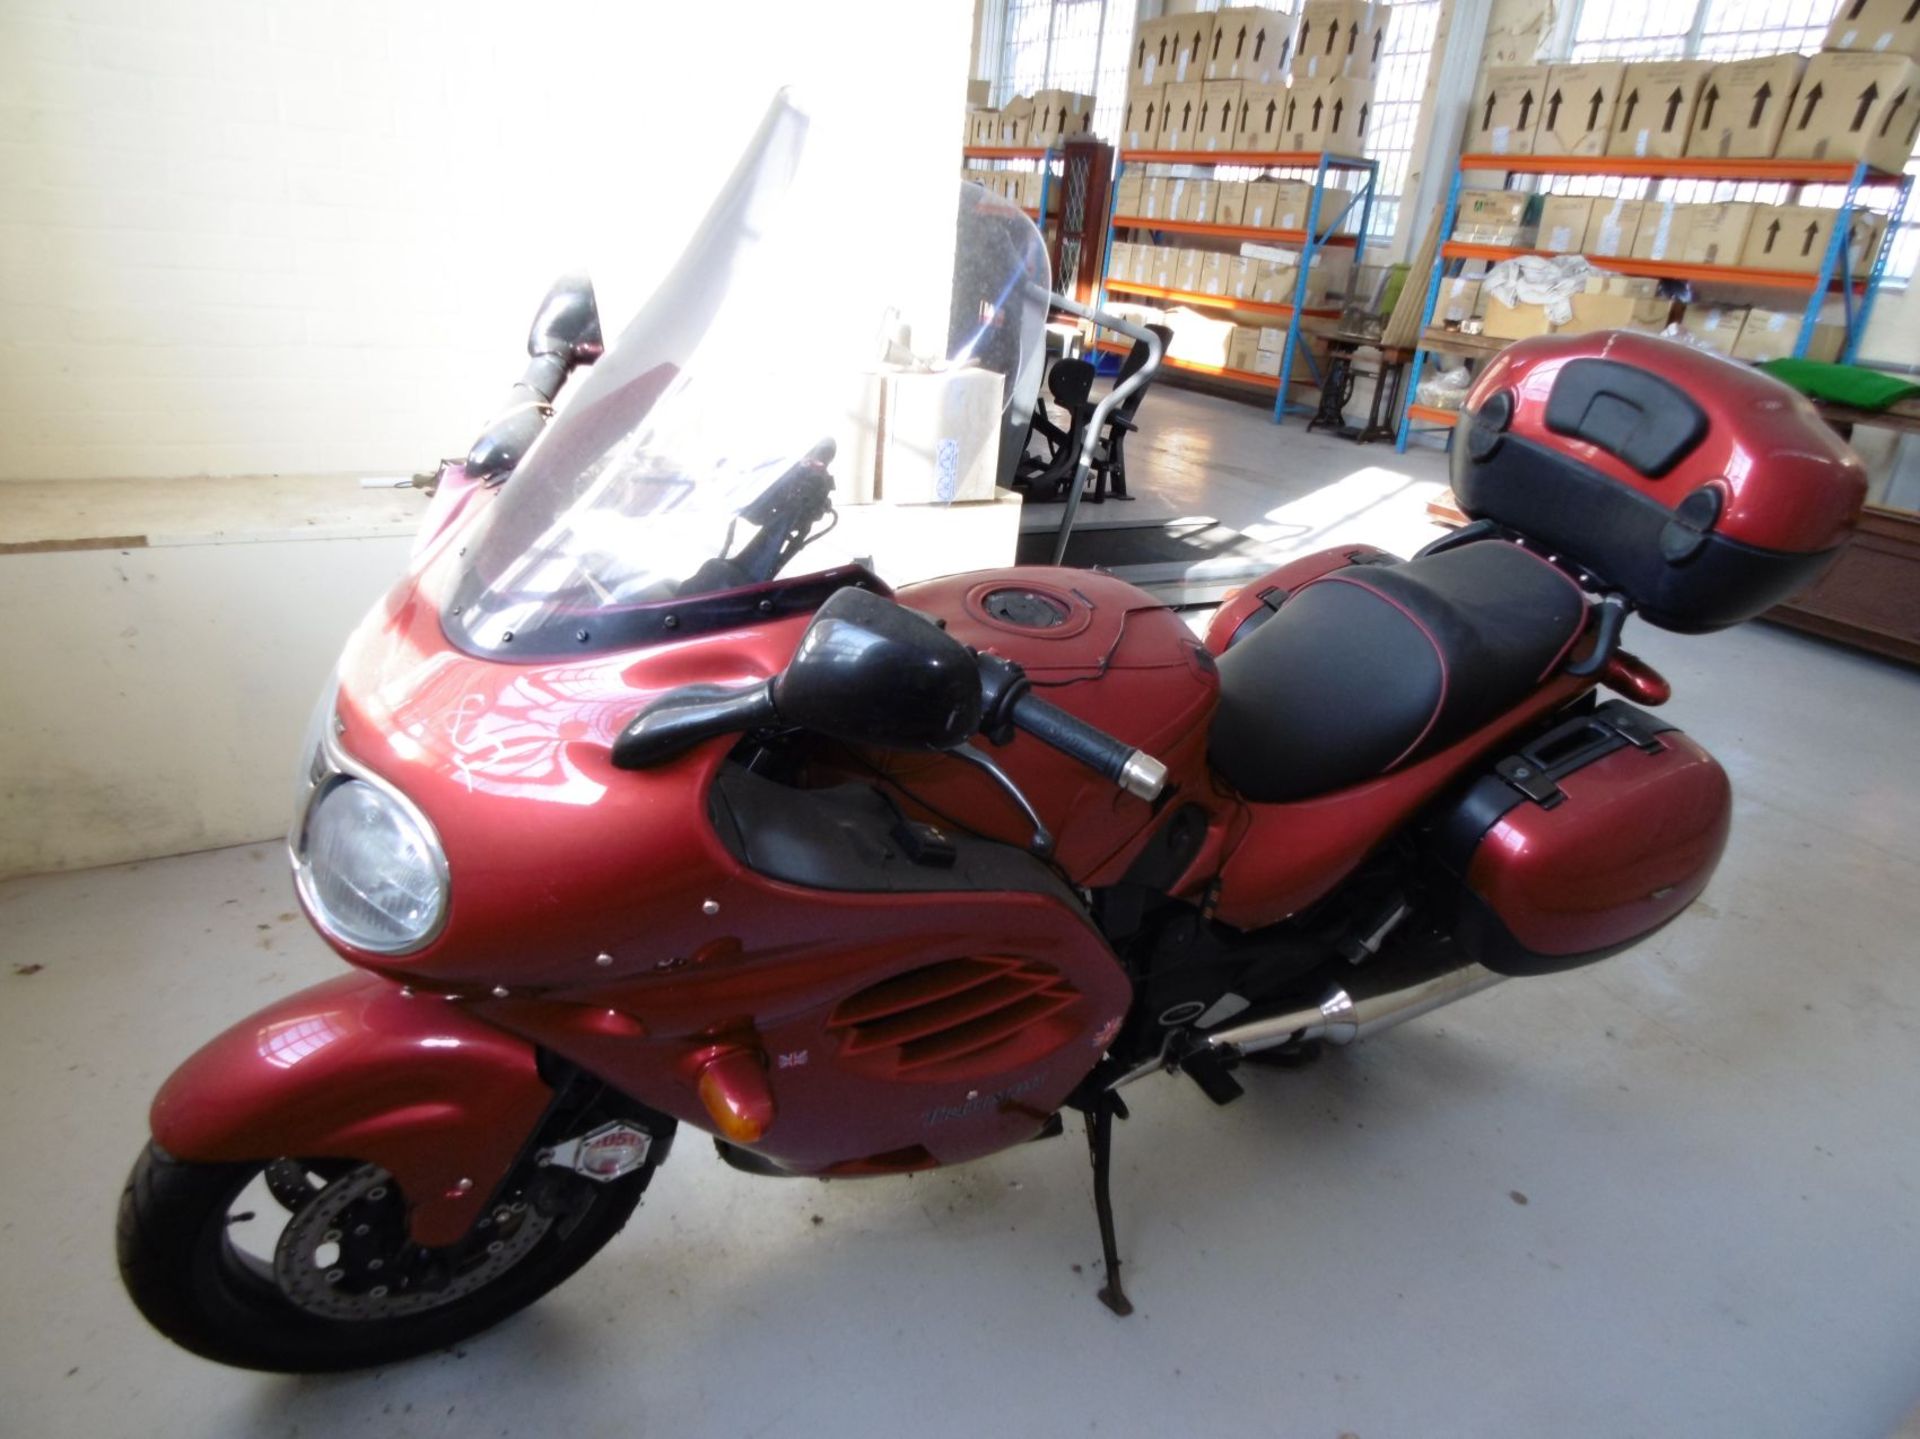 Truimph Trophy 1200cc Year man 2001 mileage 29,700 with side panniers  V5 Keys Very Good condition - Image 2 of 5